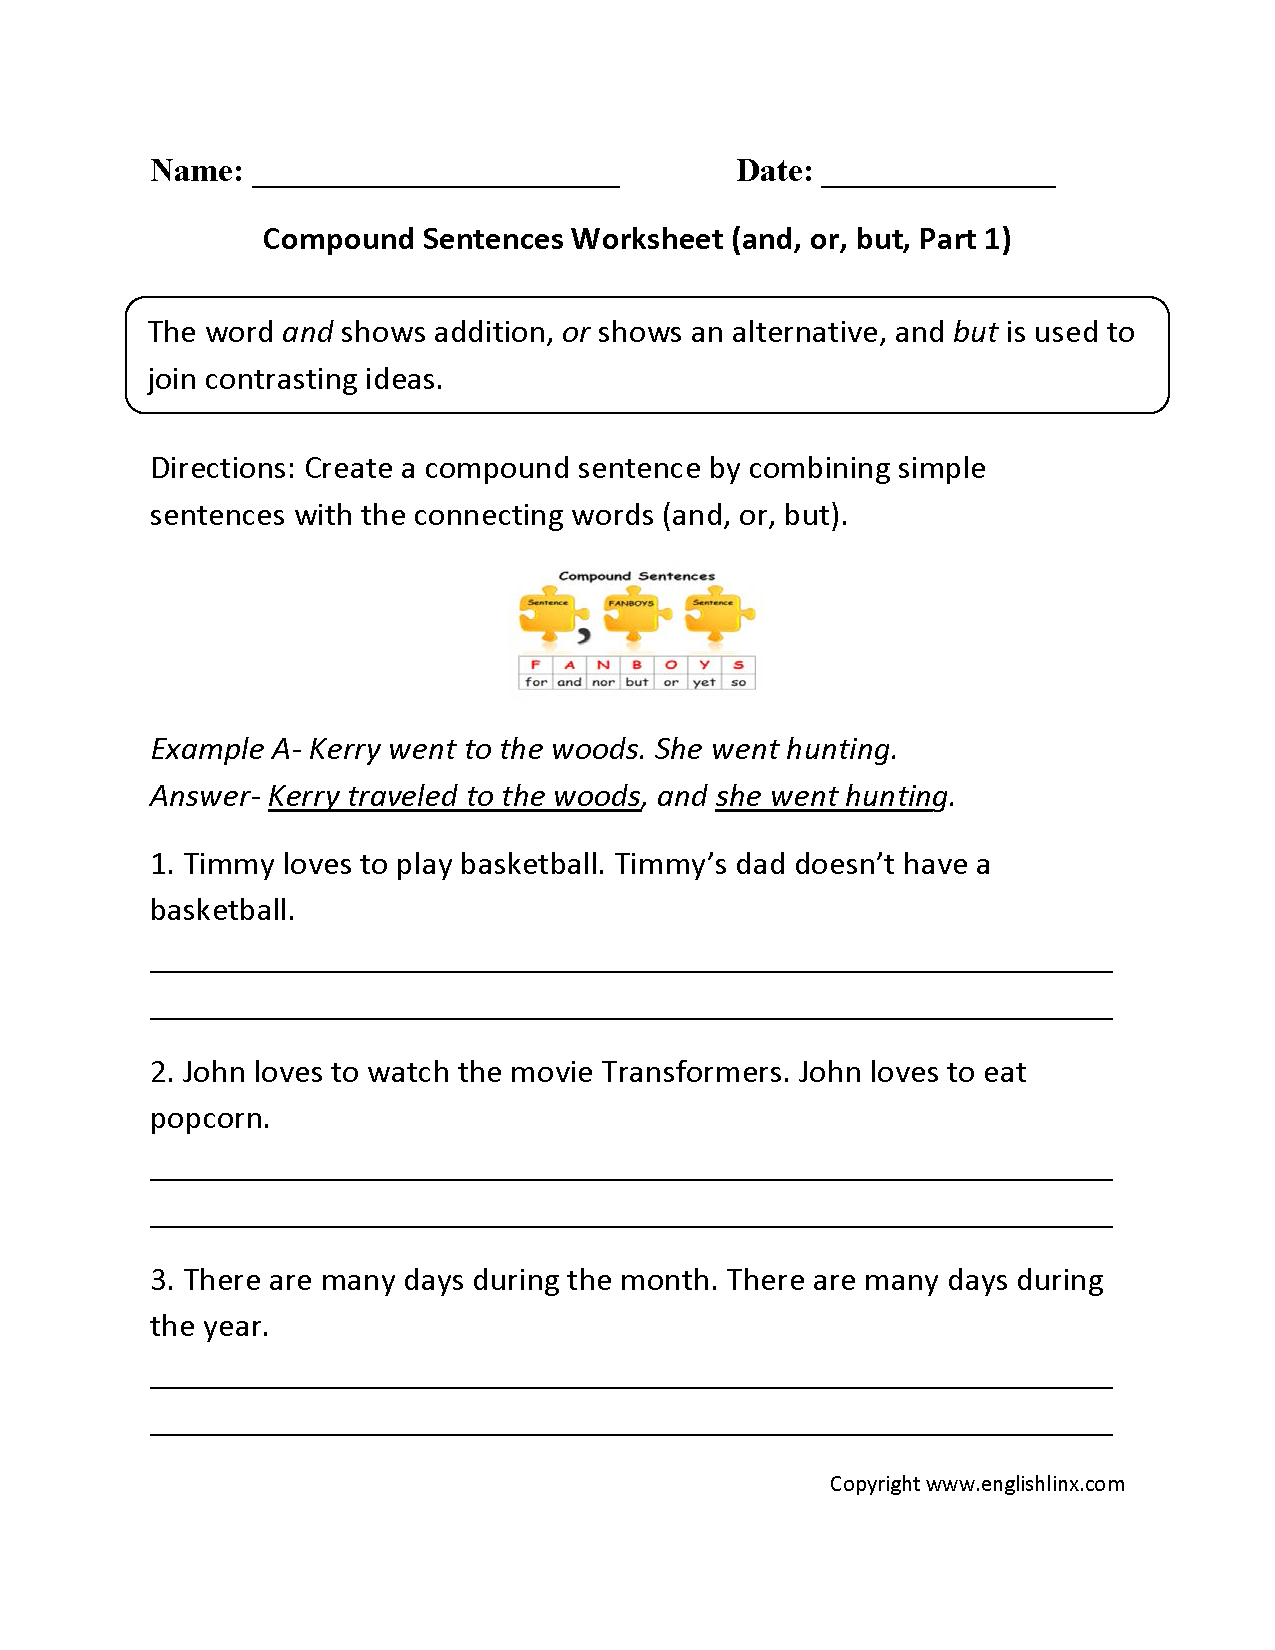 and, or, but Compound Sentences Worksheet